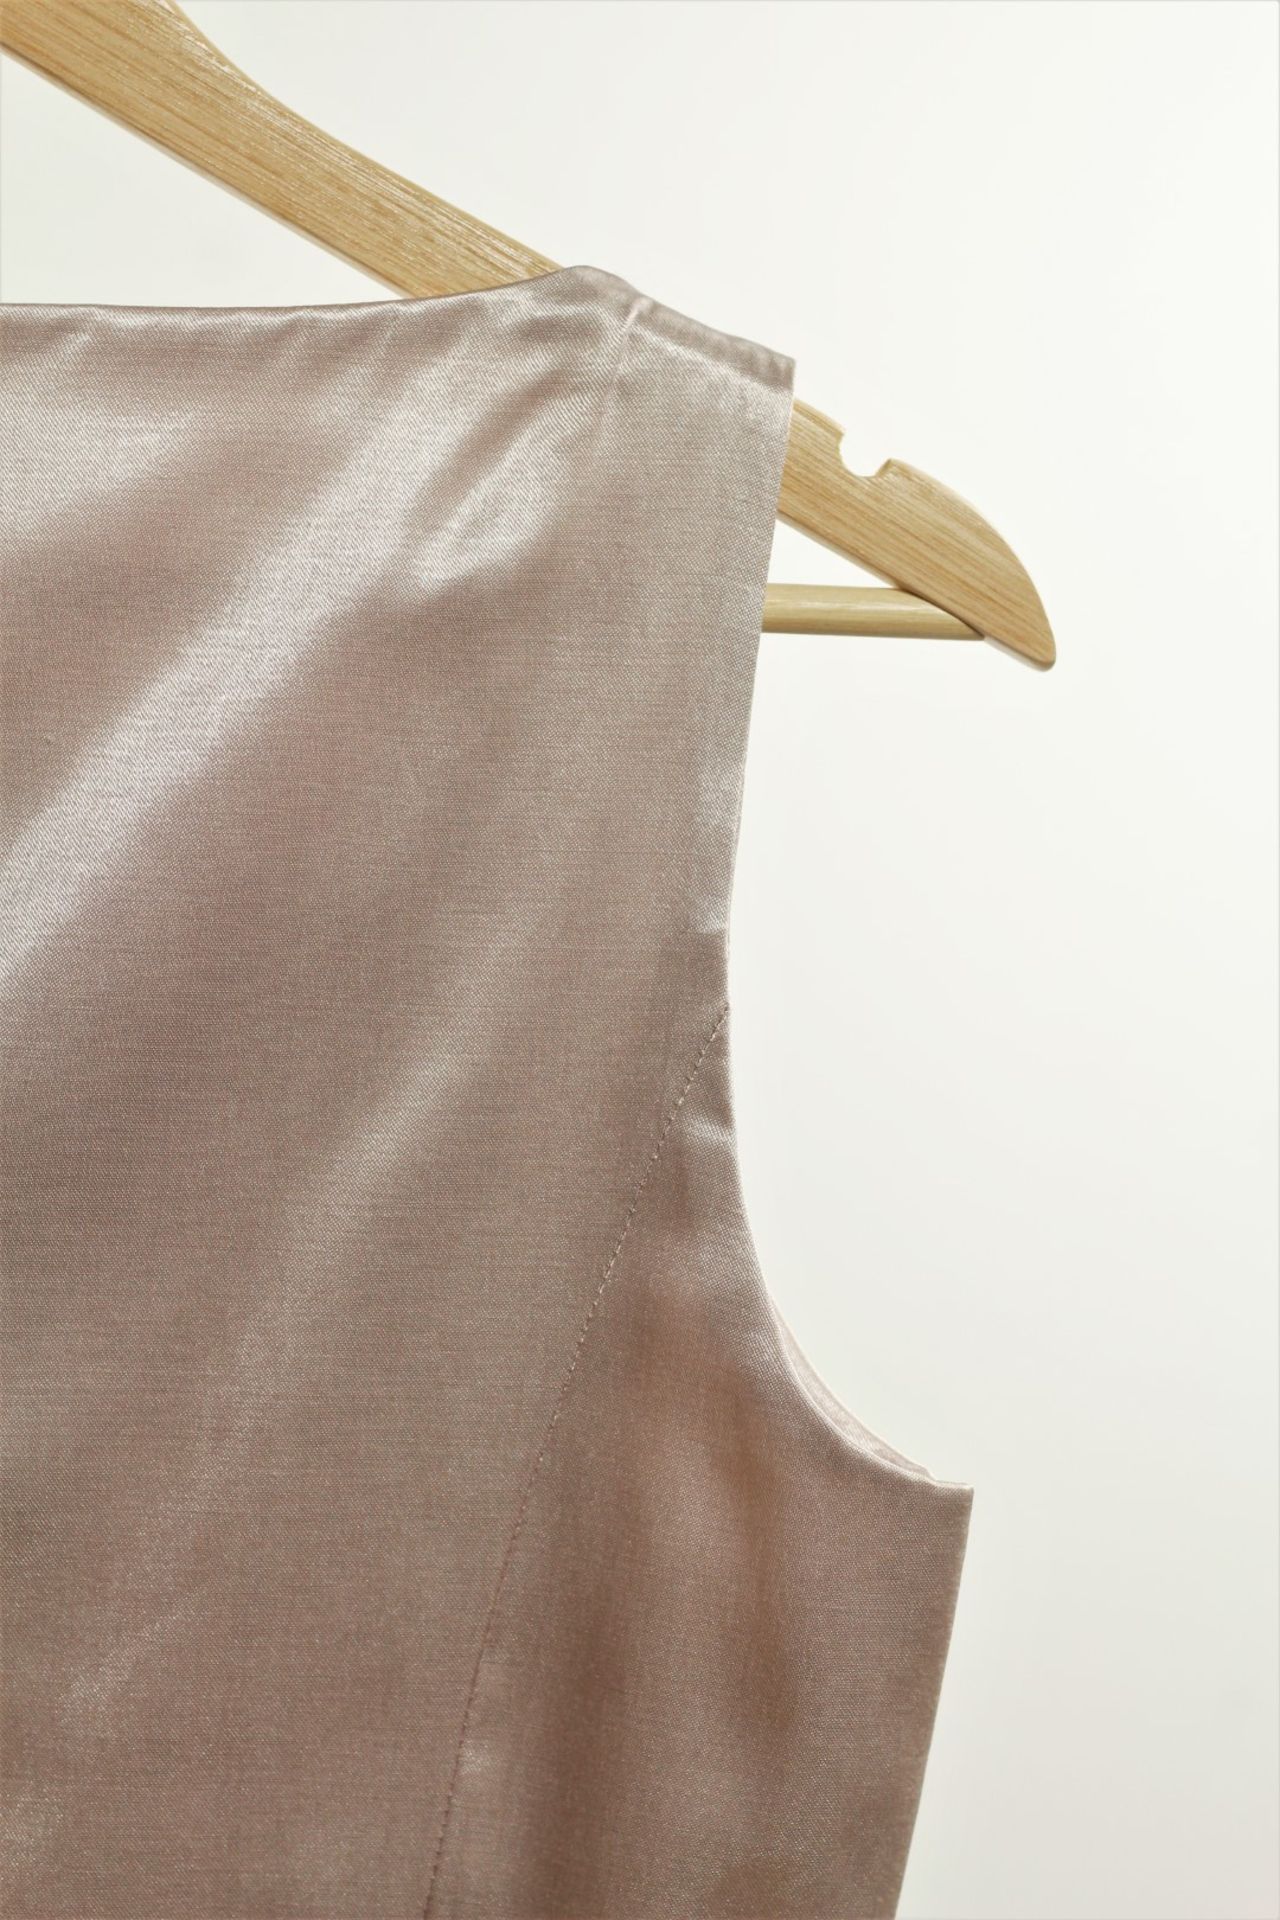 1 x Boutique Le Duc Pale Rose Vest - From a High End Clothing Boutique In The - Image 6 of 8